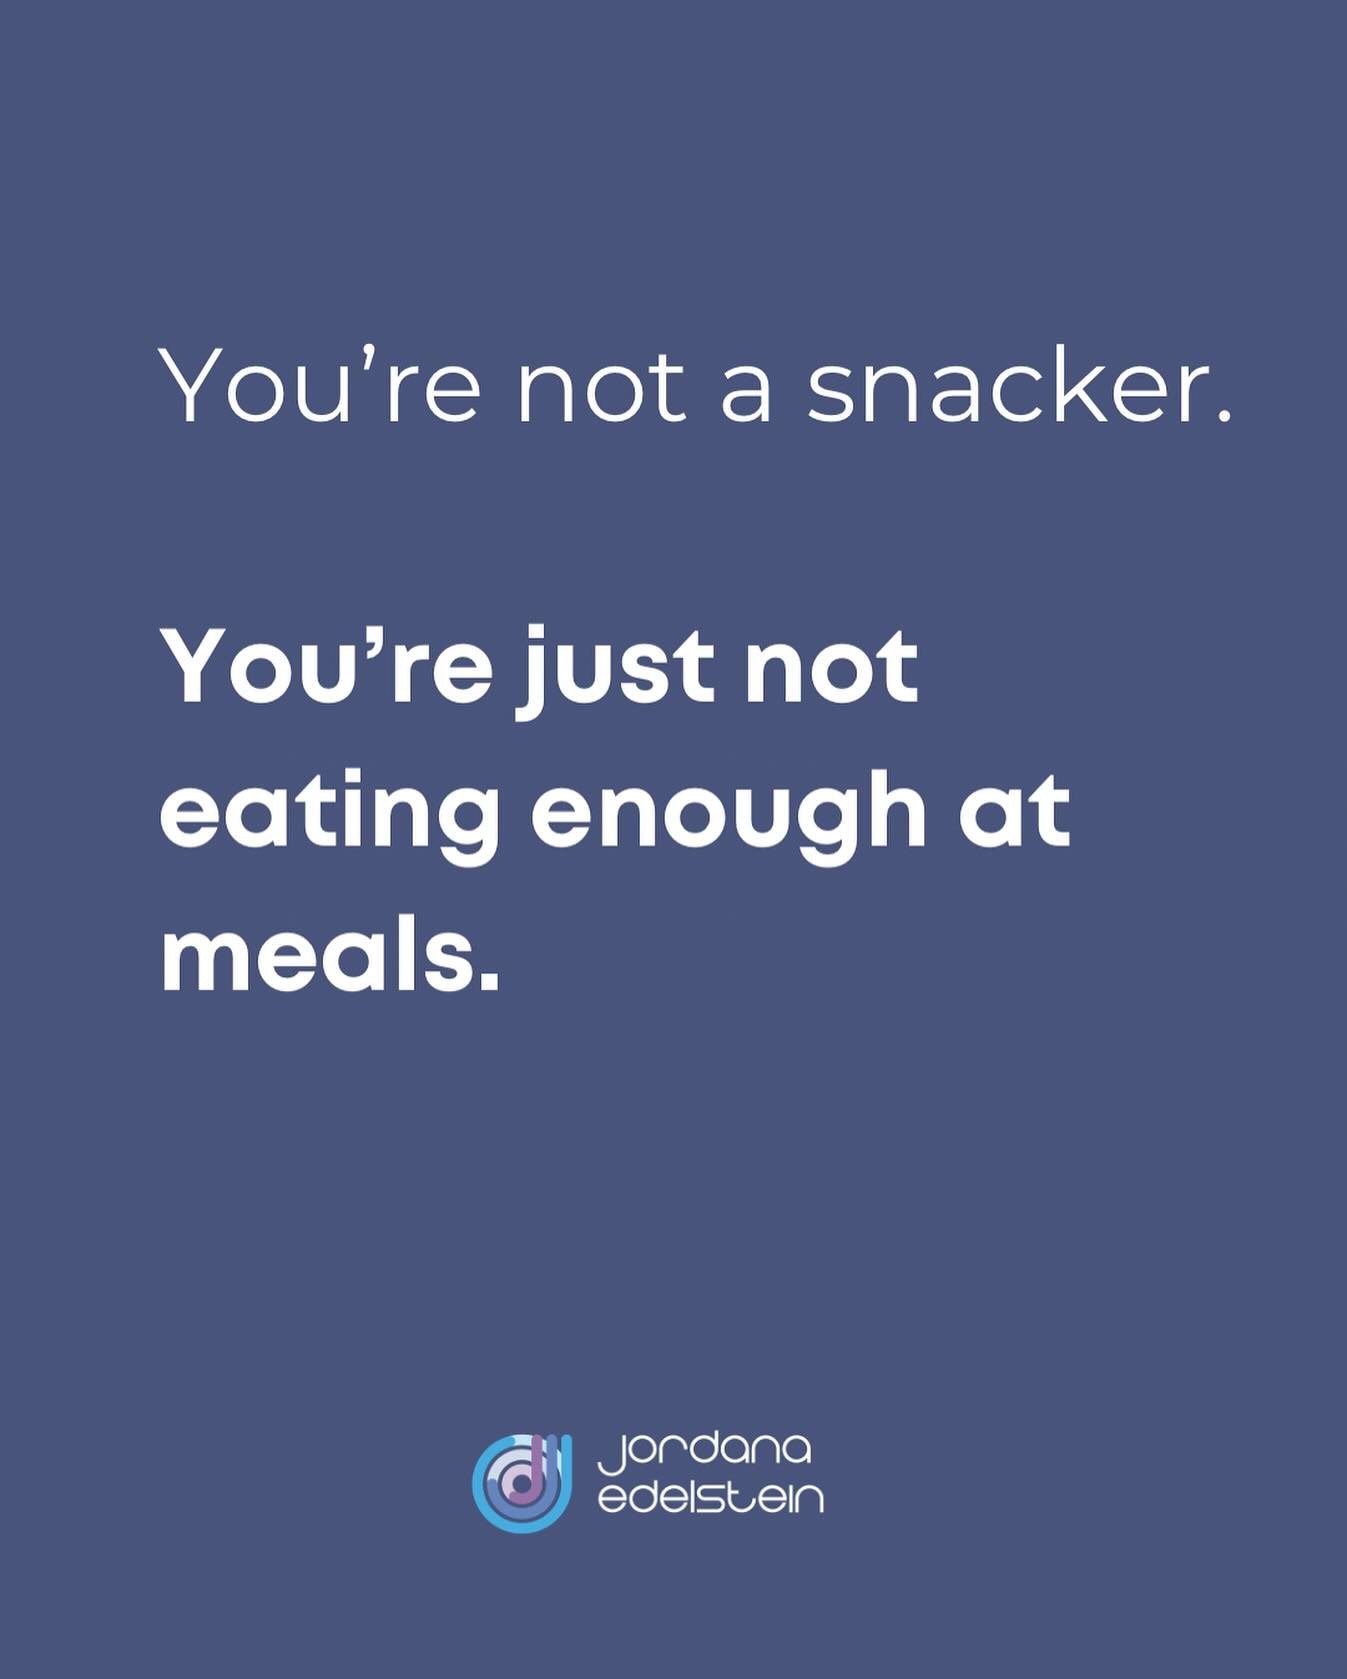 You&rsquo;re not a snacker, you&rsquo;re just not eating enough at meals. 

I could write a dissertation on this but I will do the opposite and keep it super short and simple.

Your body is not designed to eat every 2 hours. There is no such thing as